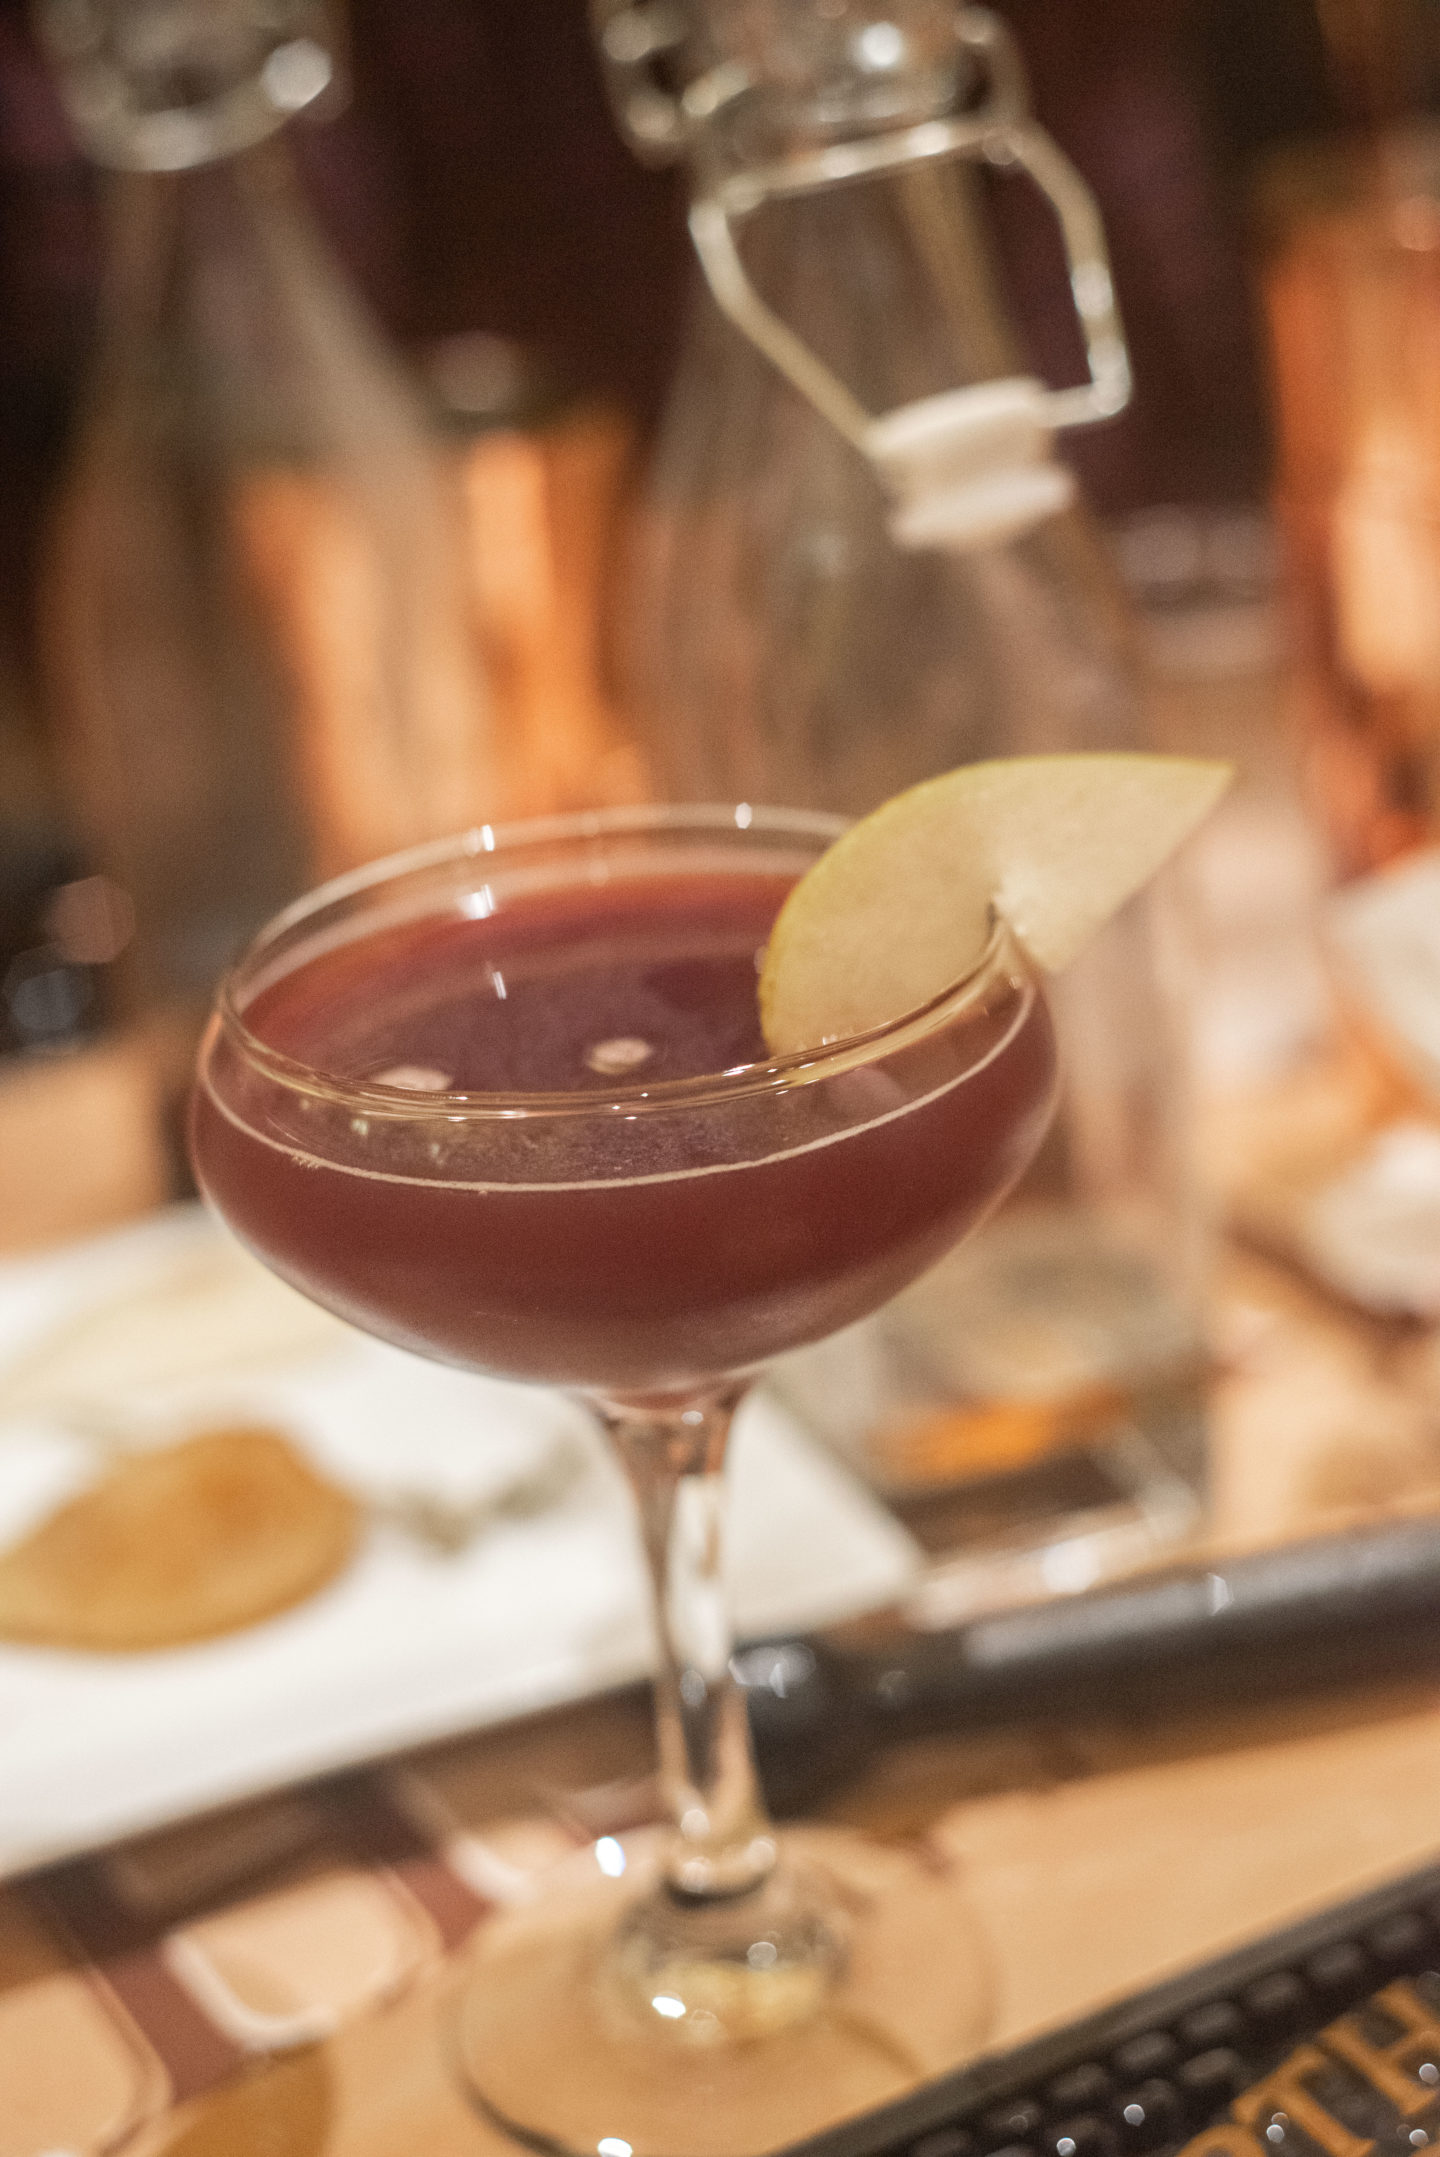 A dark colored cocktail garnished with a pear